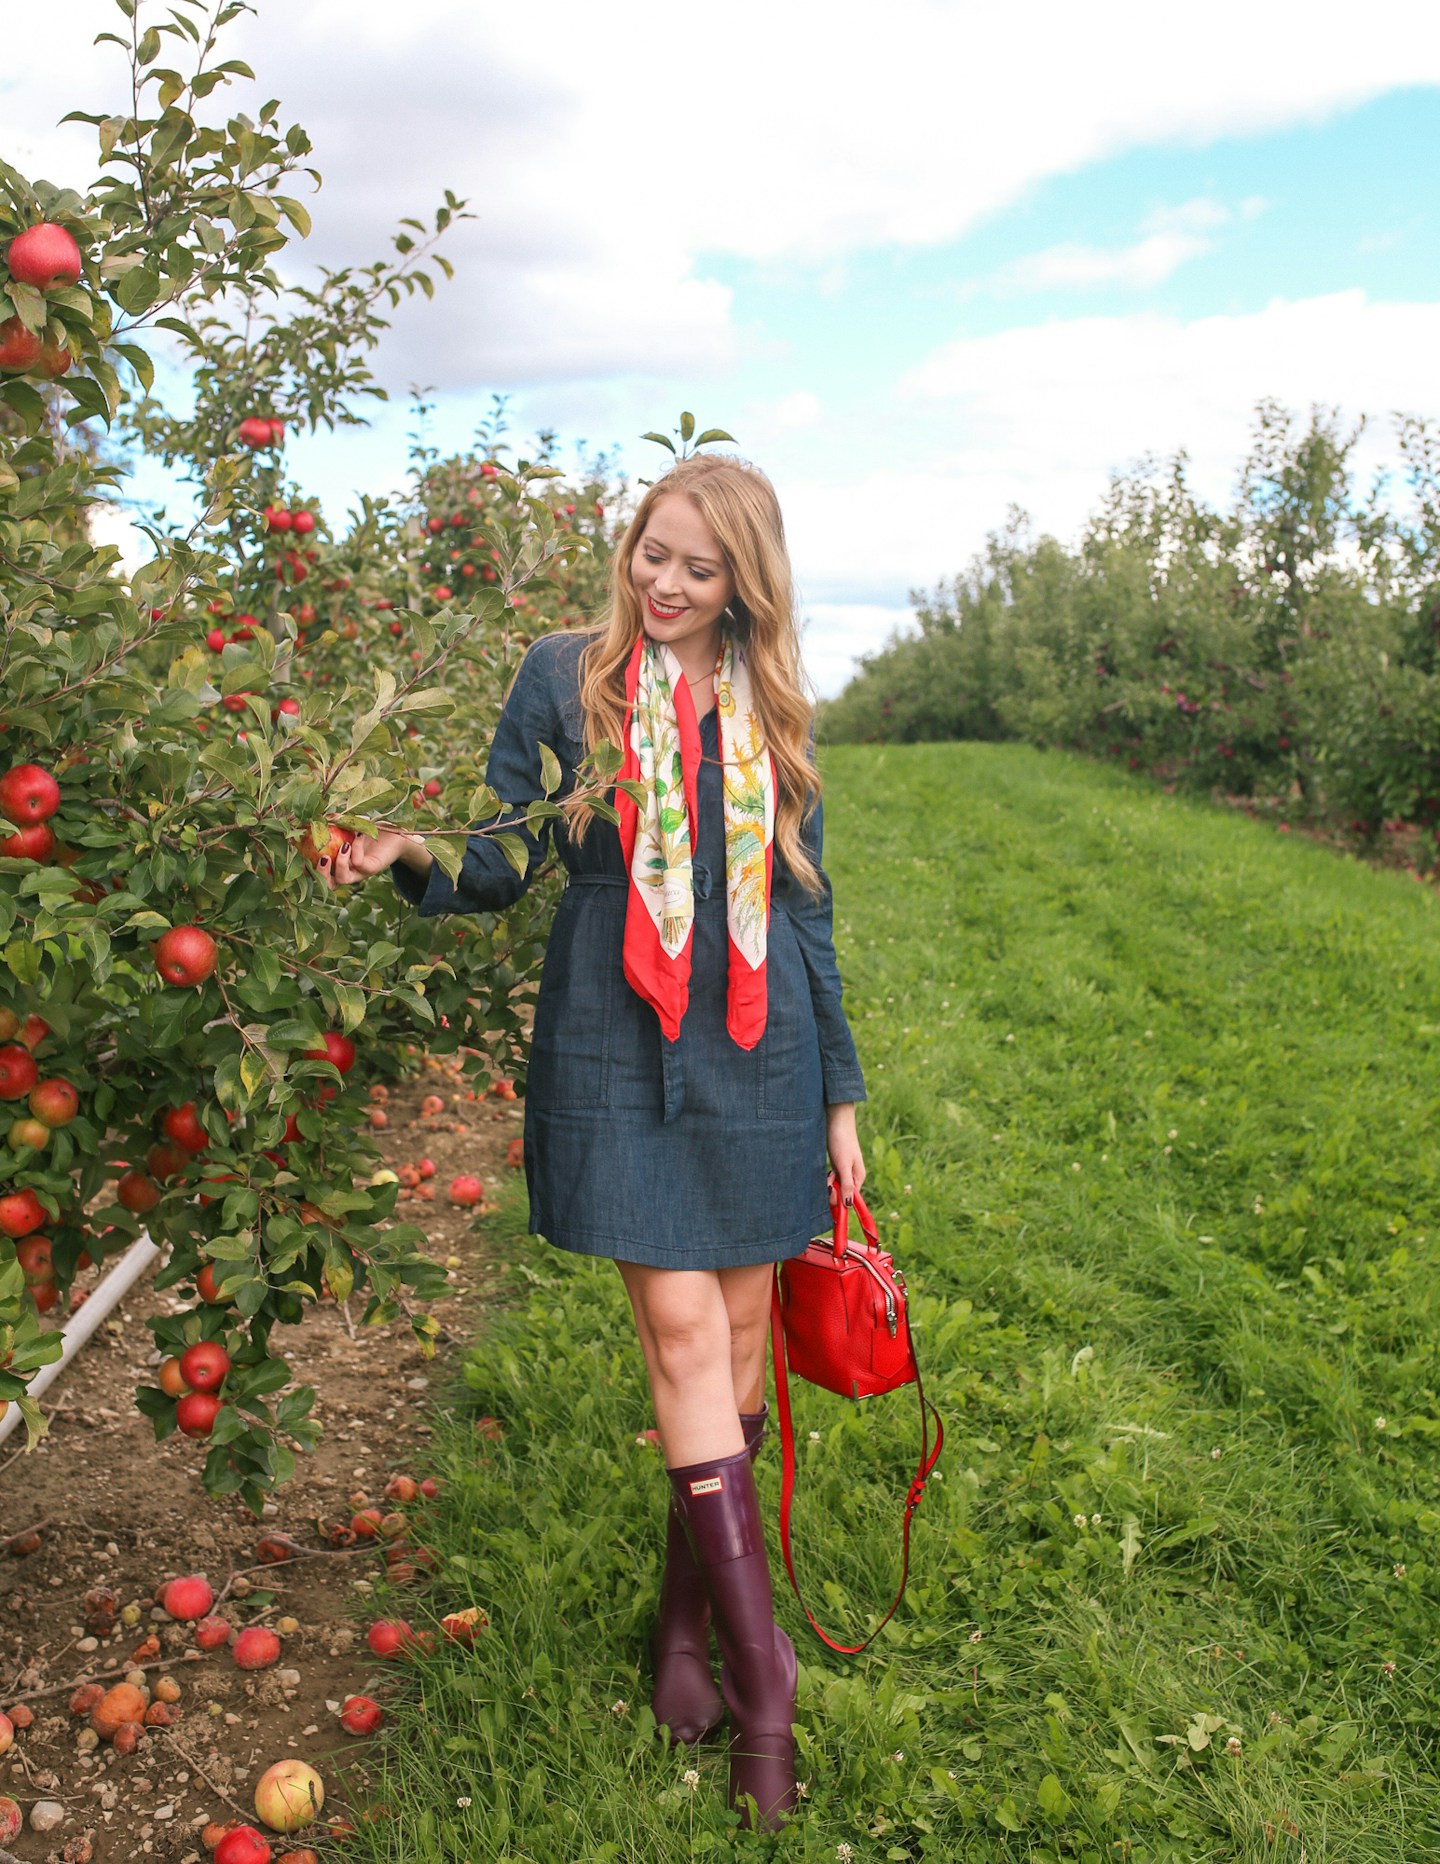 What to wear to go apple picking near Toronto: a denim dress, tall Hunter boots and a vintage Gucci silk scarf is a chic fall outfit idea.